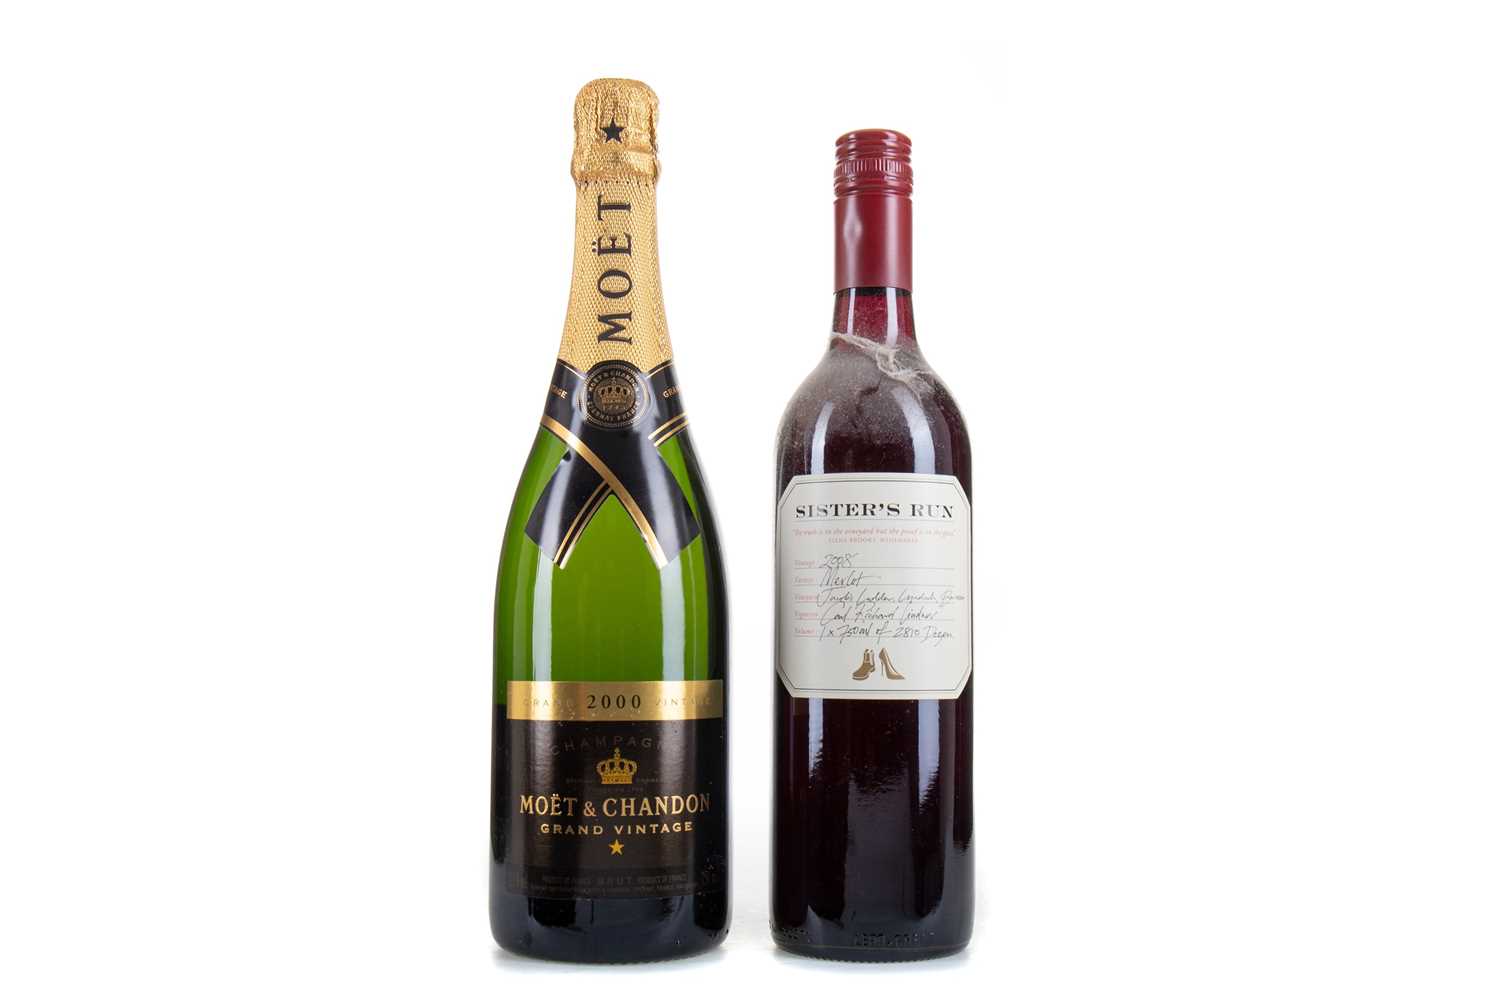 Lot 67 - MOET & CHANDON 2000 GRAND VINTAGE CHAMPAGNE 75CL AND SISTER'S RUN 2008 MERLOT 75CL